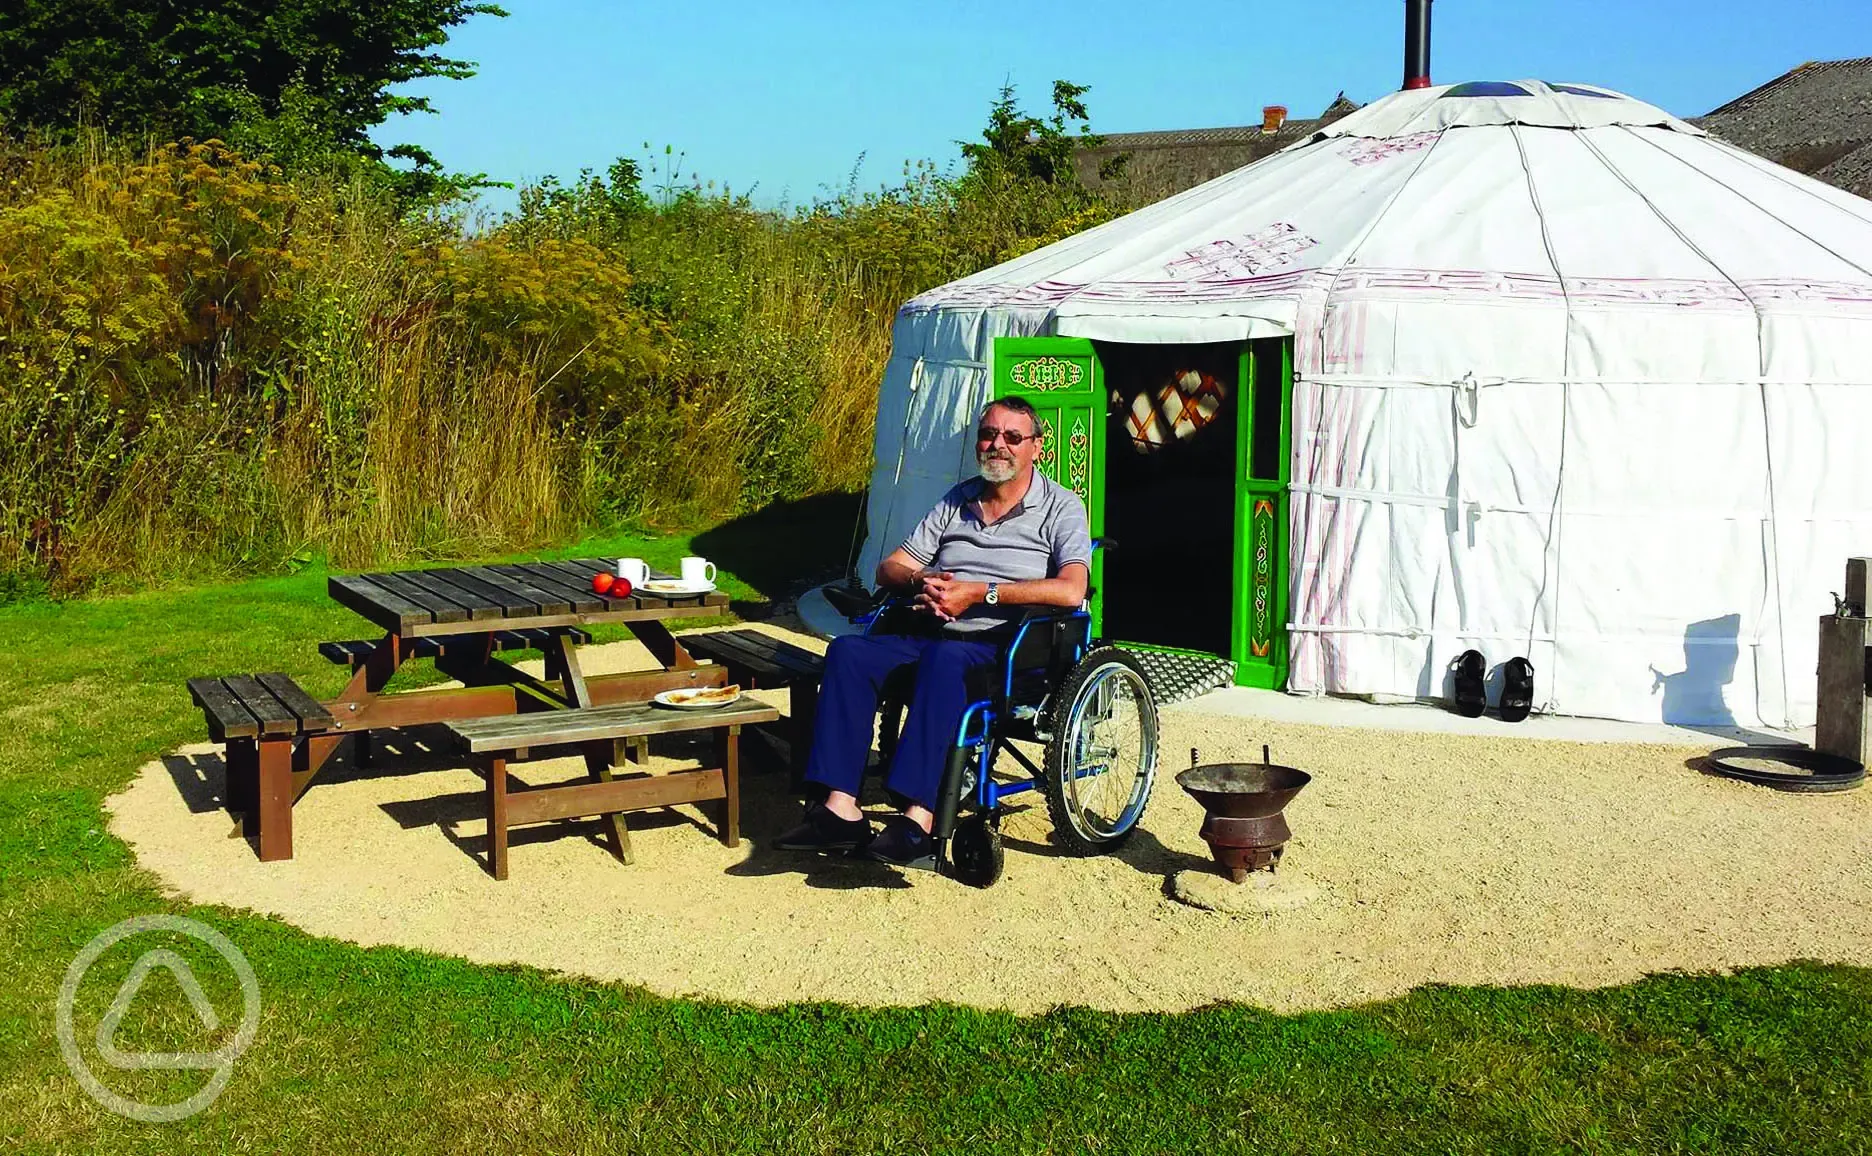 We welcome disabled users. The site is level and the yurts have ramps, and the wet rooms are adapted for wheelchair users.